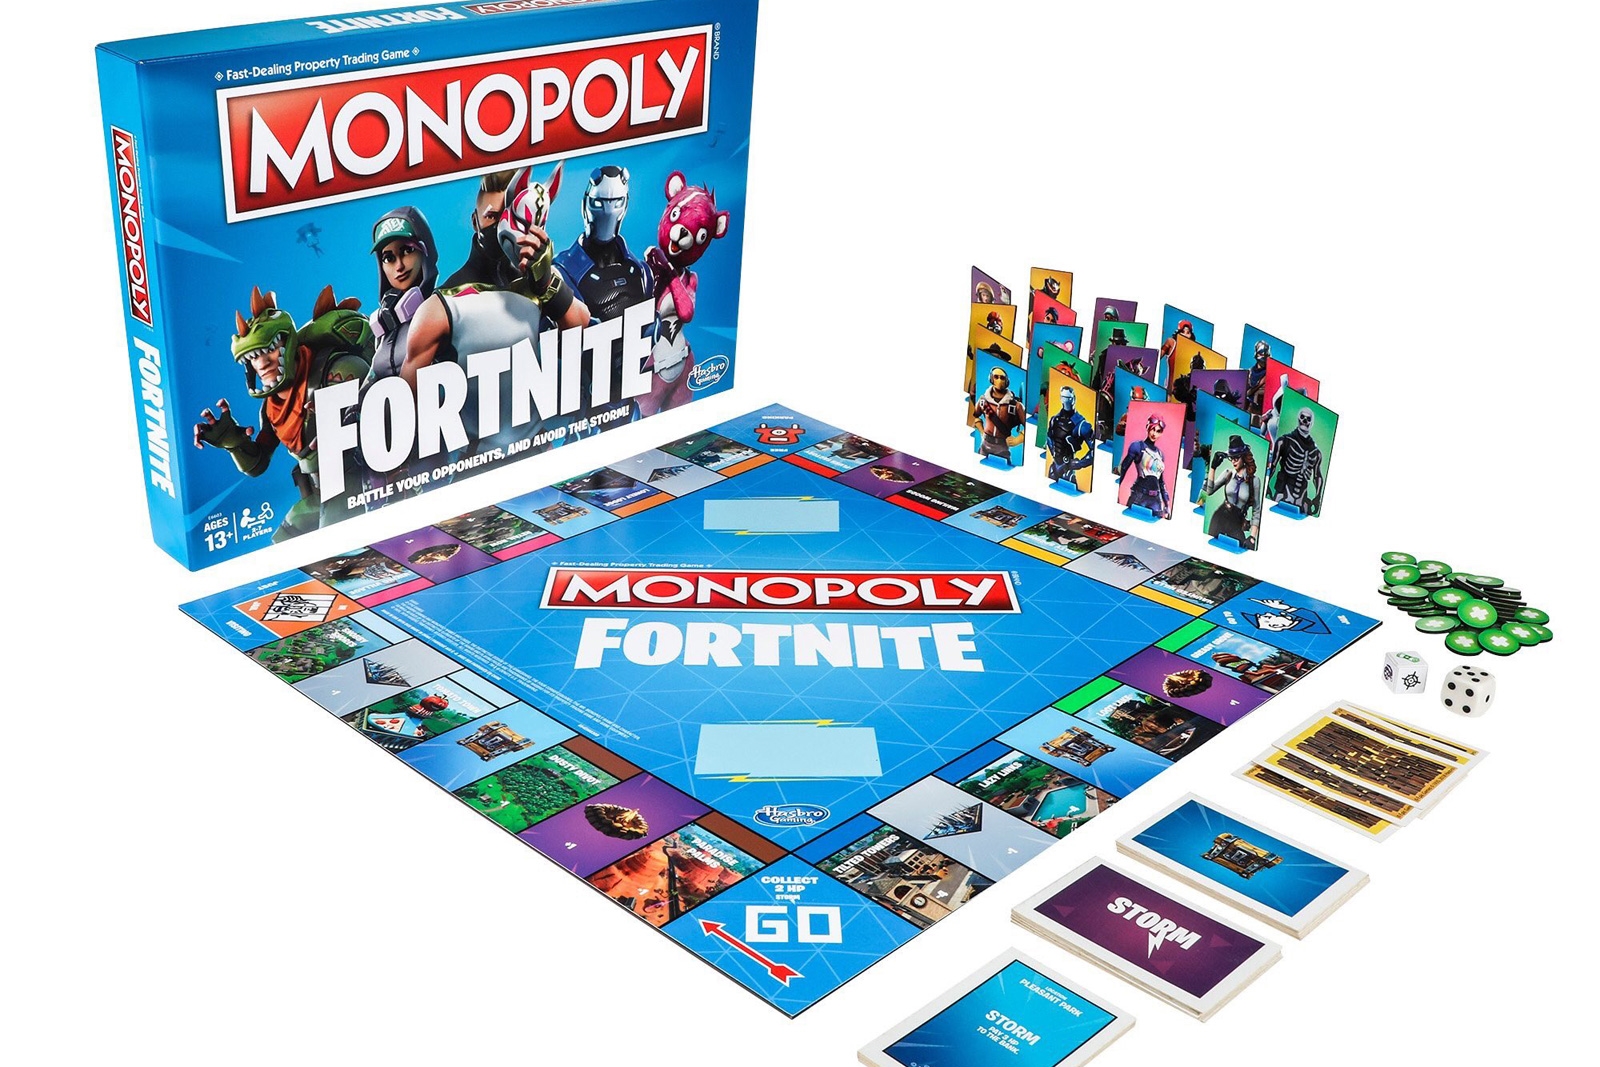 In 'Fortnite' Monopoly, Tilted Towers is the new Boardwalk | DeviceDaily.com